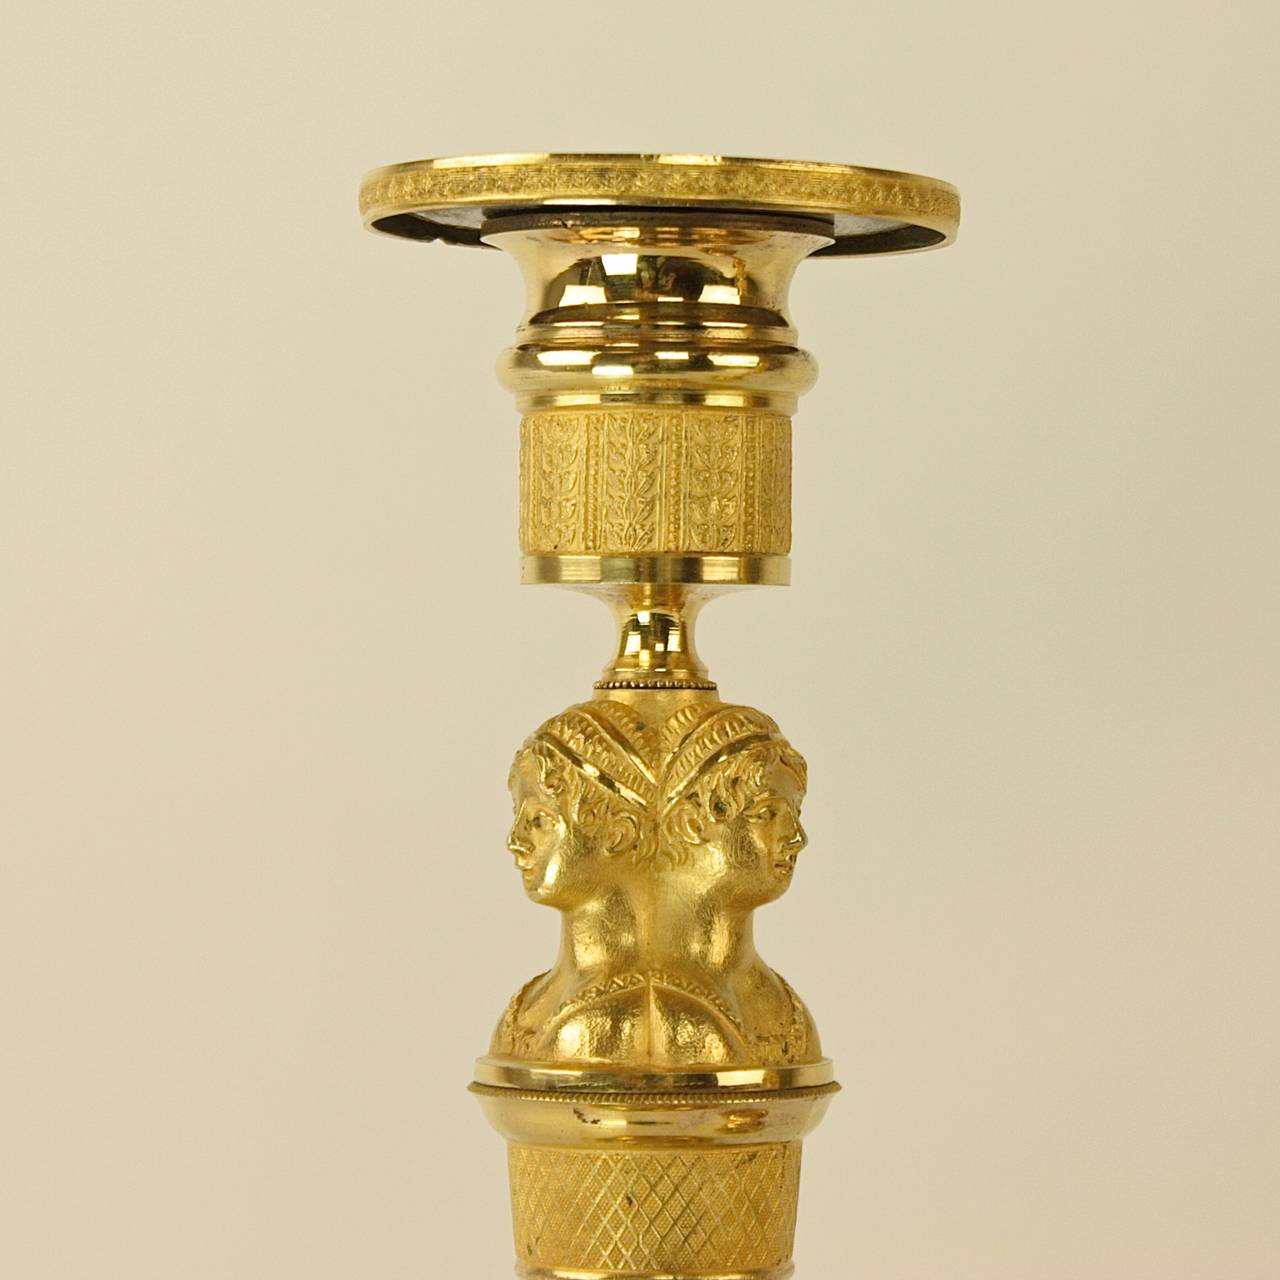 A beautiful pair of Empire candlesticks decorated with three female busts, dressed in the fashion of the time, resting on a finely chiseled and fluted shaft, supported by three pairs of flat pumps/slippers - the fashionable shoe of the gentle ladies